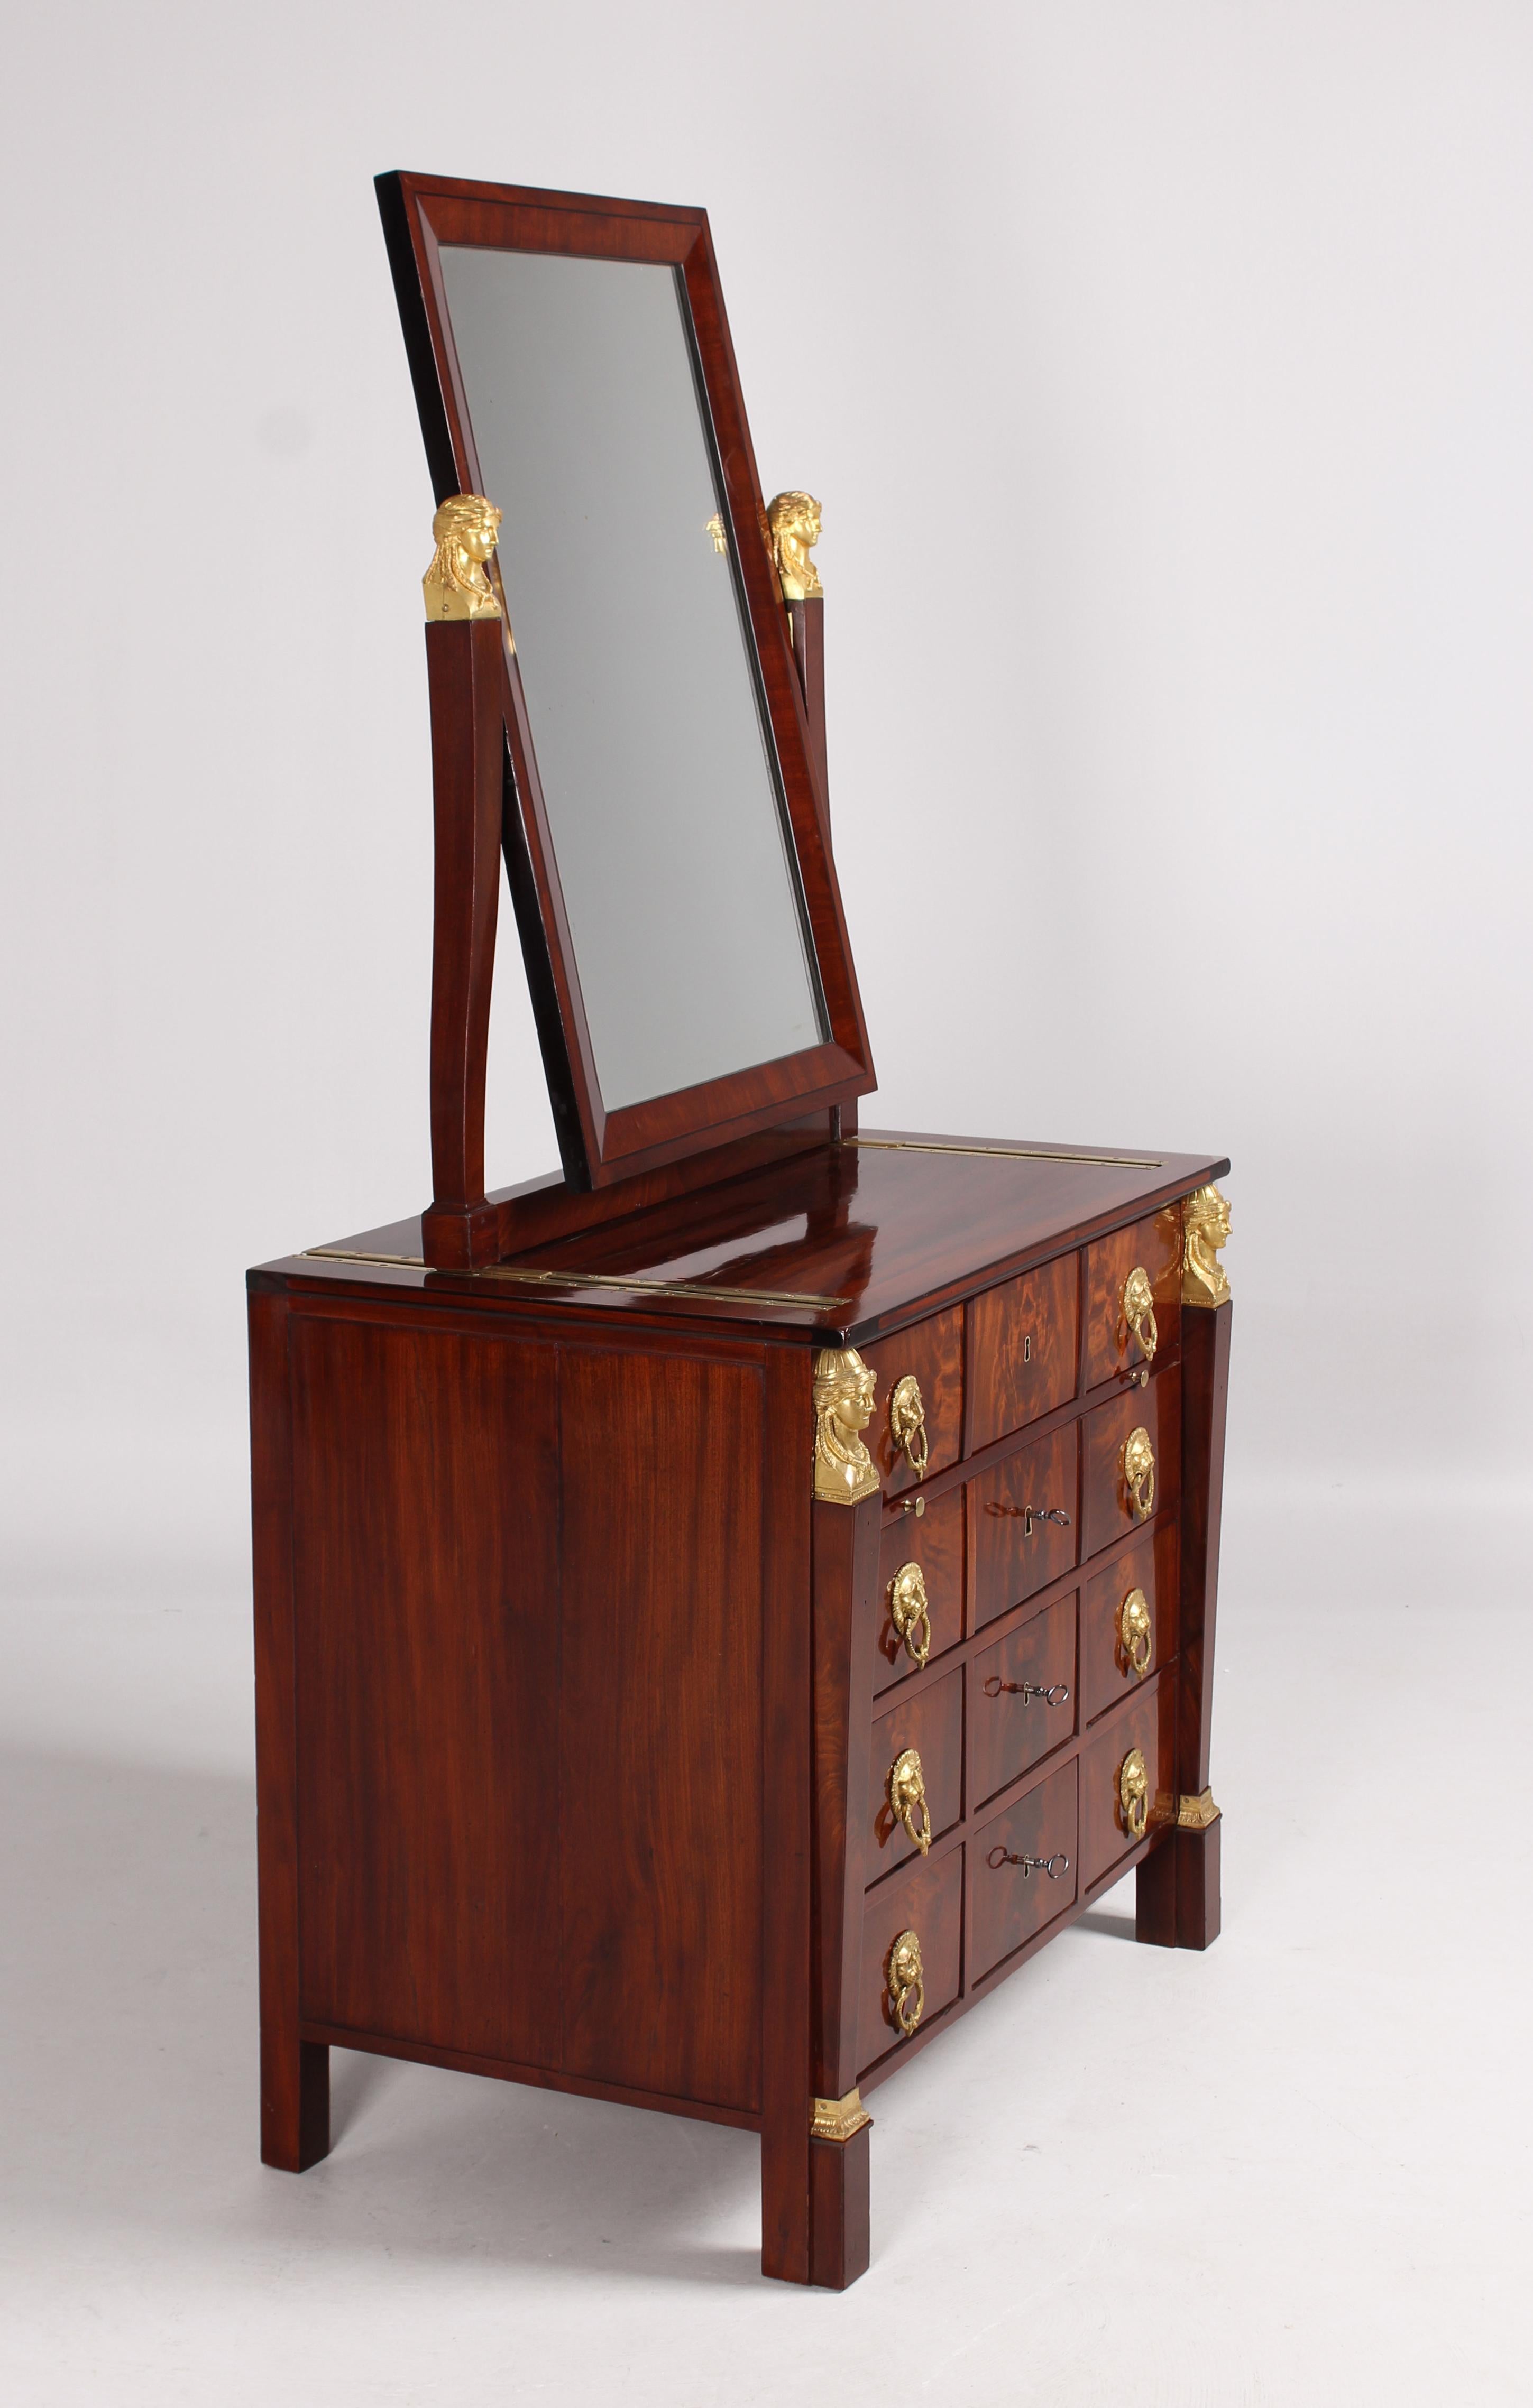 Antique dressing table - stamped Chapuis
Brussels
Mahogany
Empire around 1810

Dimensions: H x W x D: 178 x 91 x 56 cm, height without mirror: 82 cm

Description:
Elaborately crafted early 19th century dressing table from the workshop of Jean-Joseph